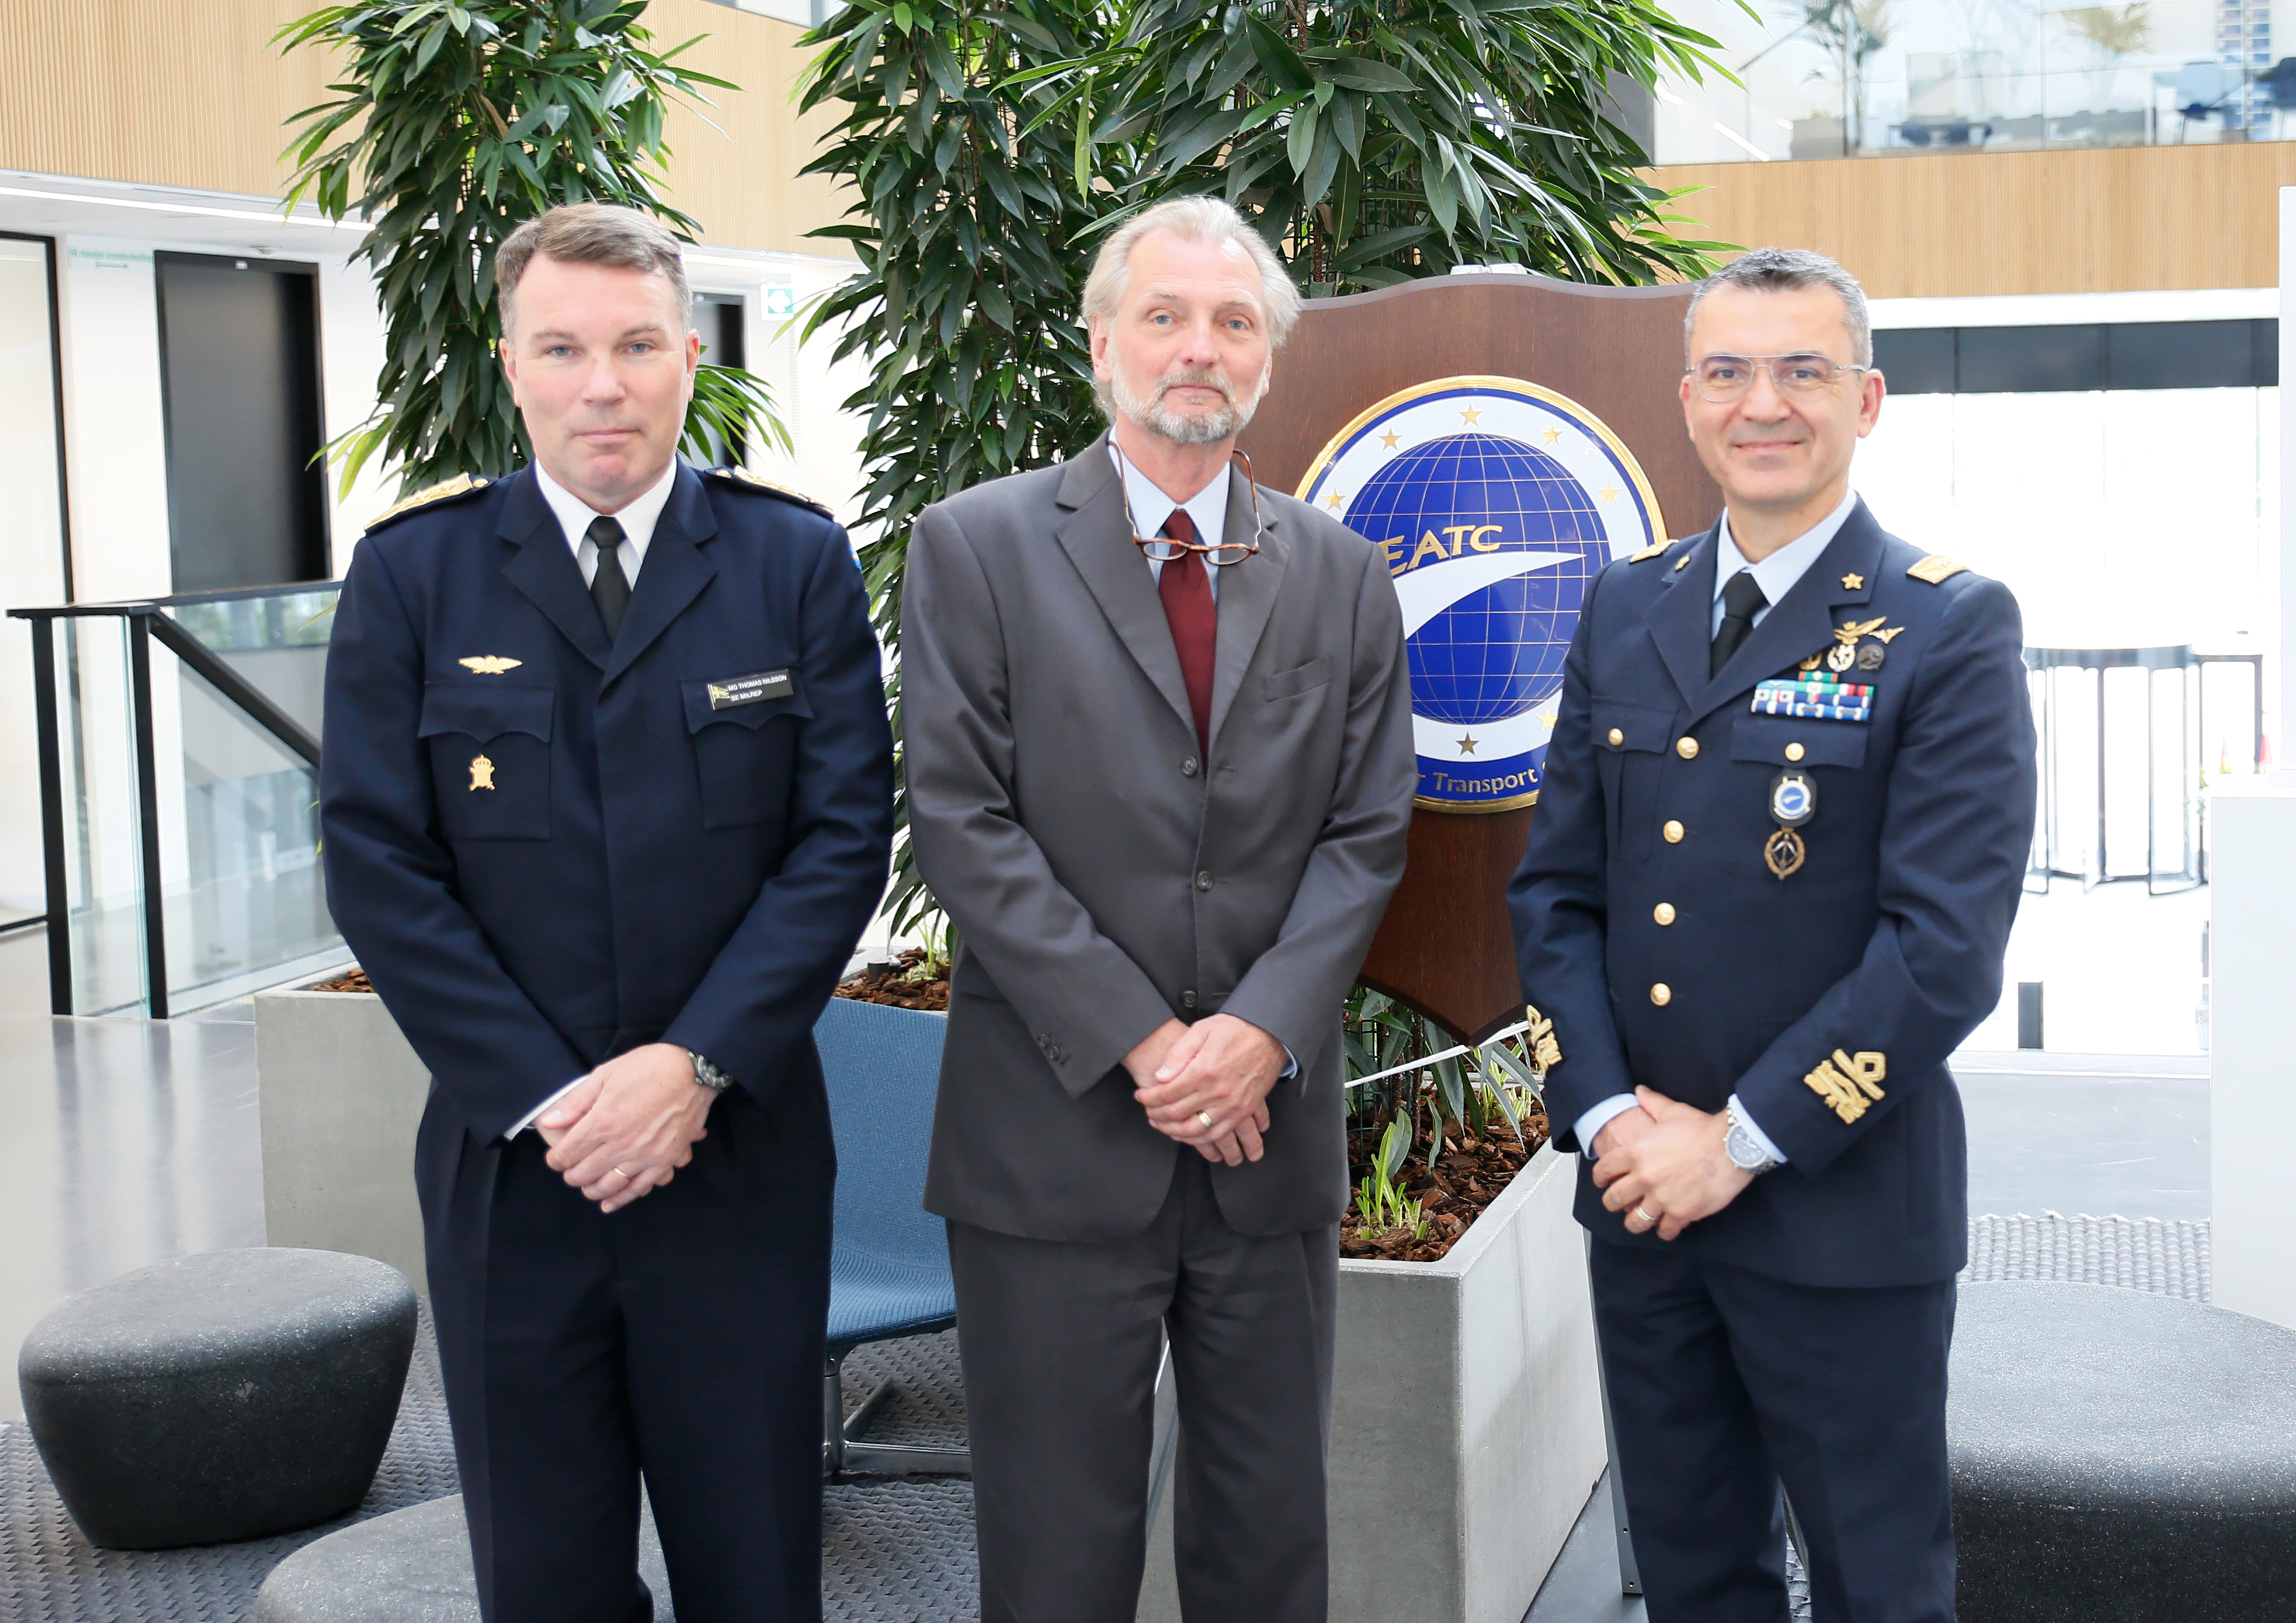 Head of Mission of Sweden to NATO visited EATC